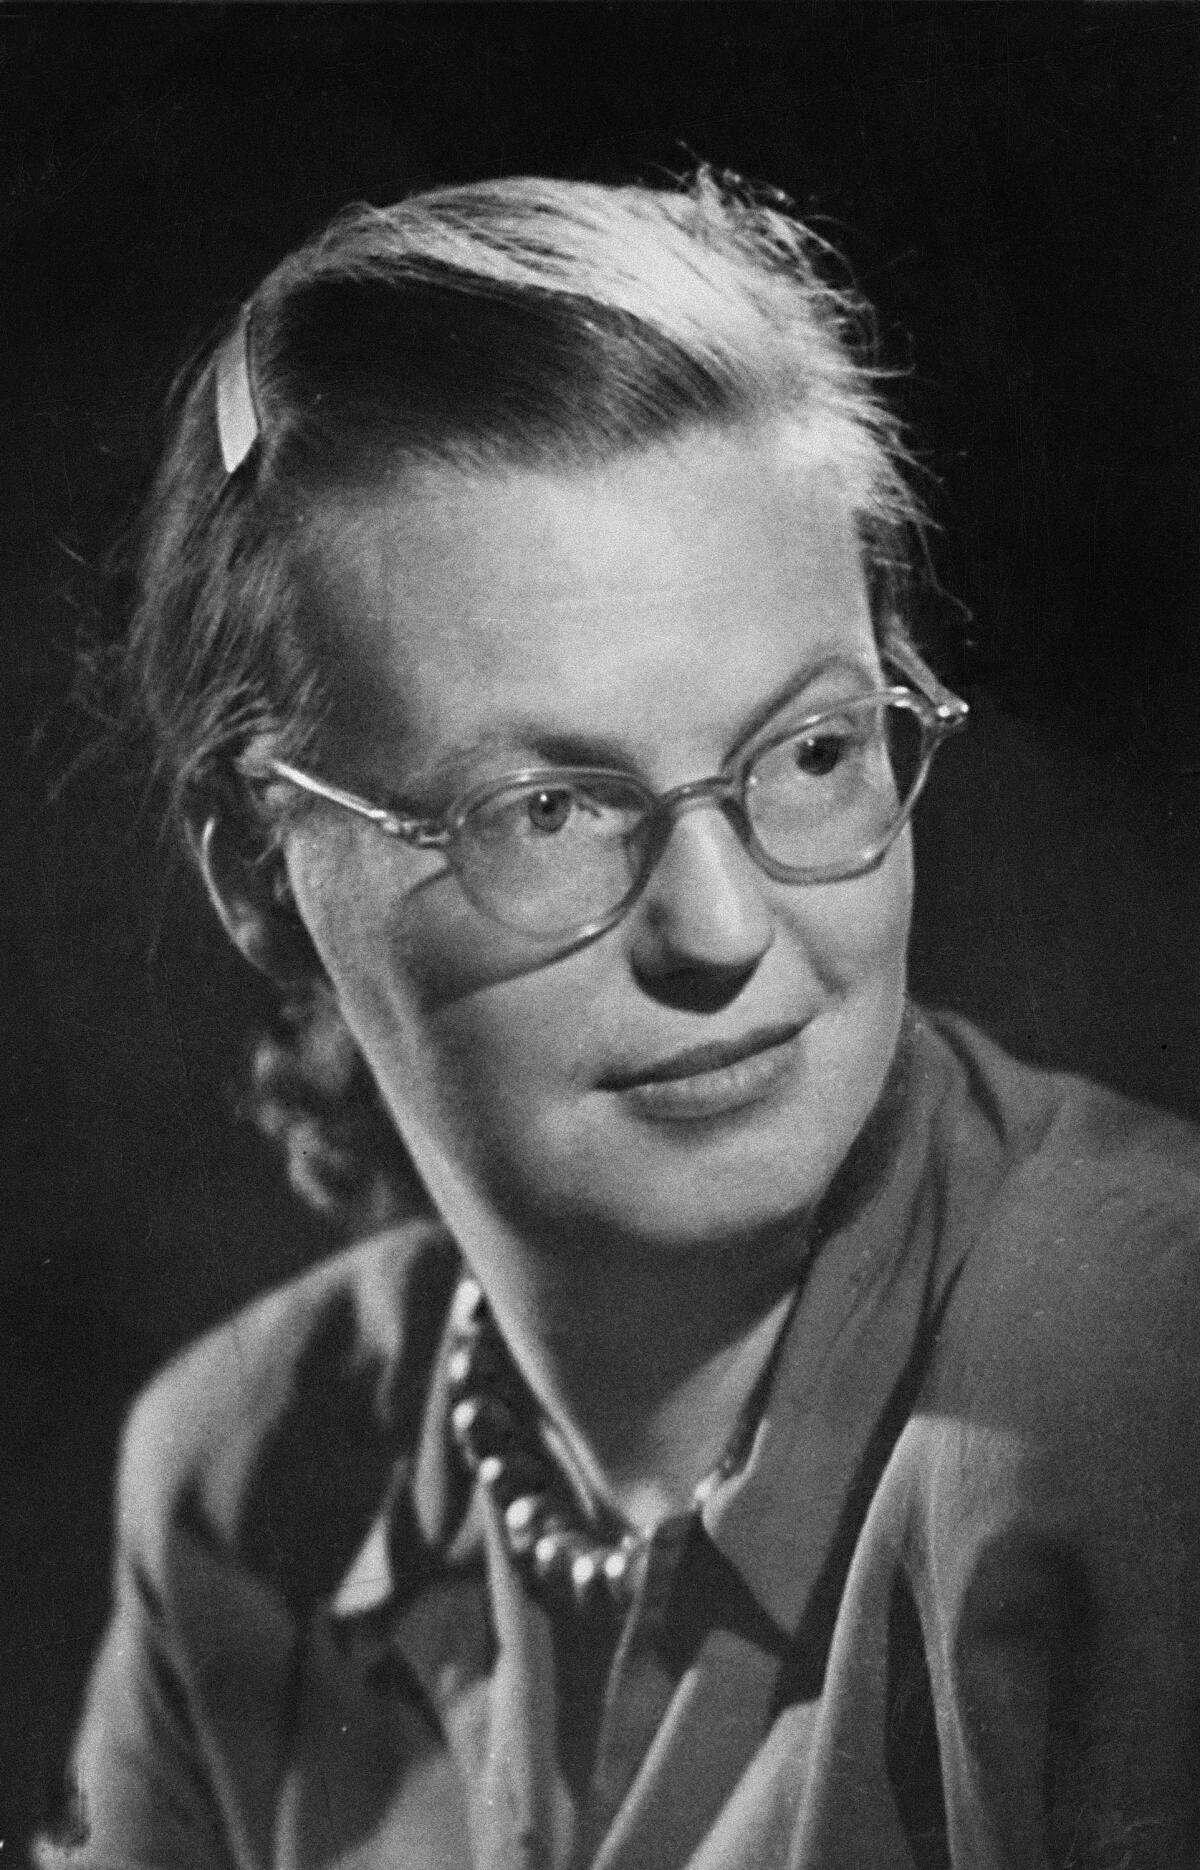 Won't the real Shirley Jackson, seen here in 1951, please stand up?